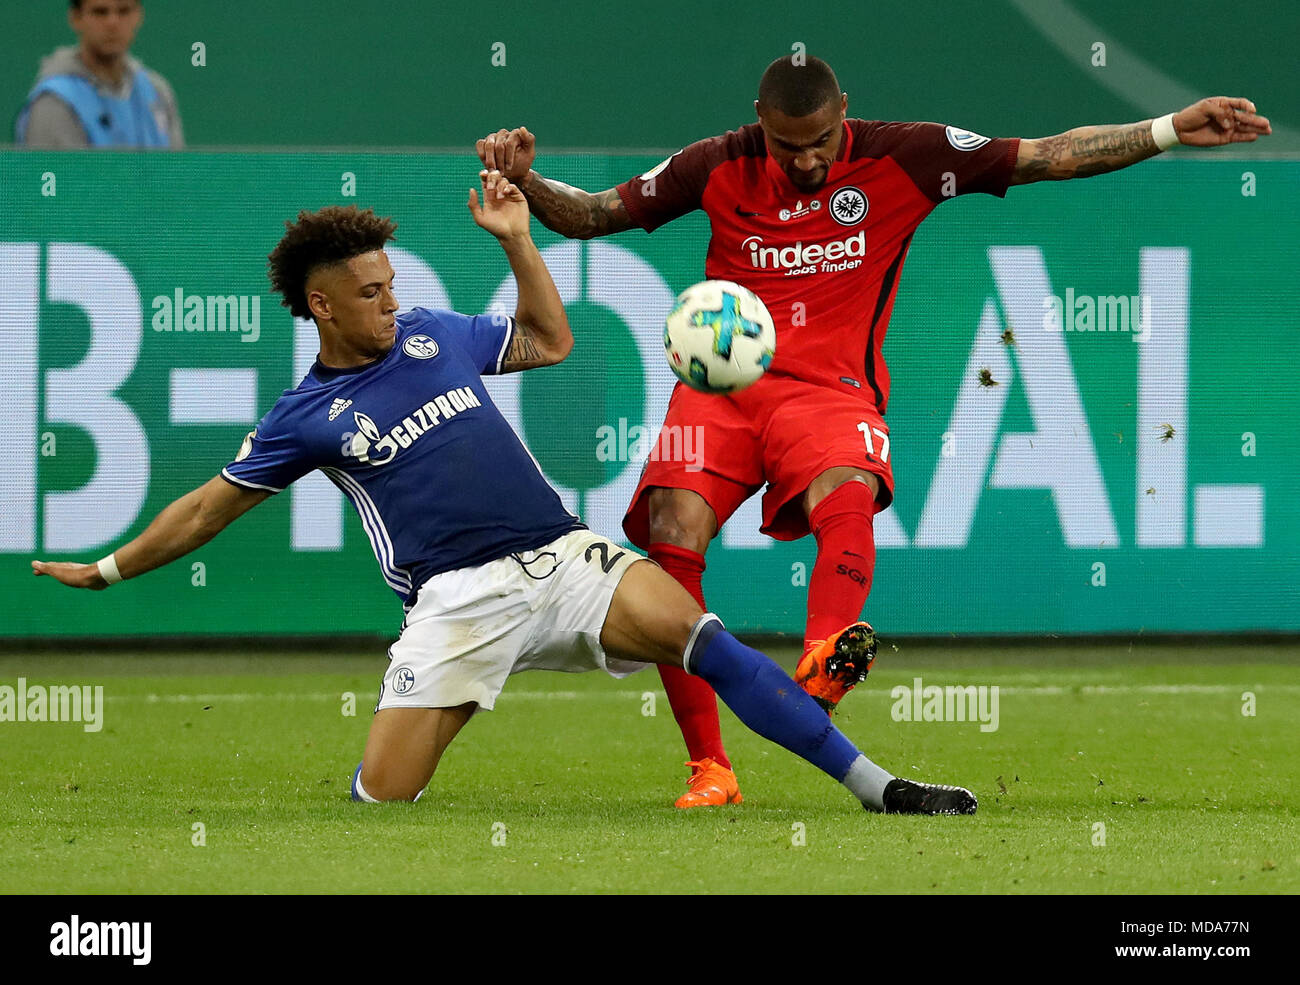 Gelsenkirchen. 18th Apr, 2018. Kevin-Prince Boateng (R) of Eintracht Frankfurt and Thilo Kehrer of Schalke 04 vie for the ball during the German DFB Pokal match between Schalke 04 and Eintracht Frankfurt at the Veltins Arena in Gelsenkirchen Germany, on April 18, 2018. Credit: Joachim Bywaletz/Xinhua/Alamy Live News Stock Photo